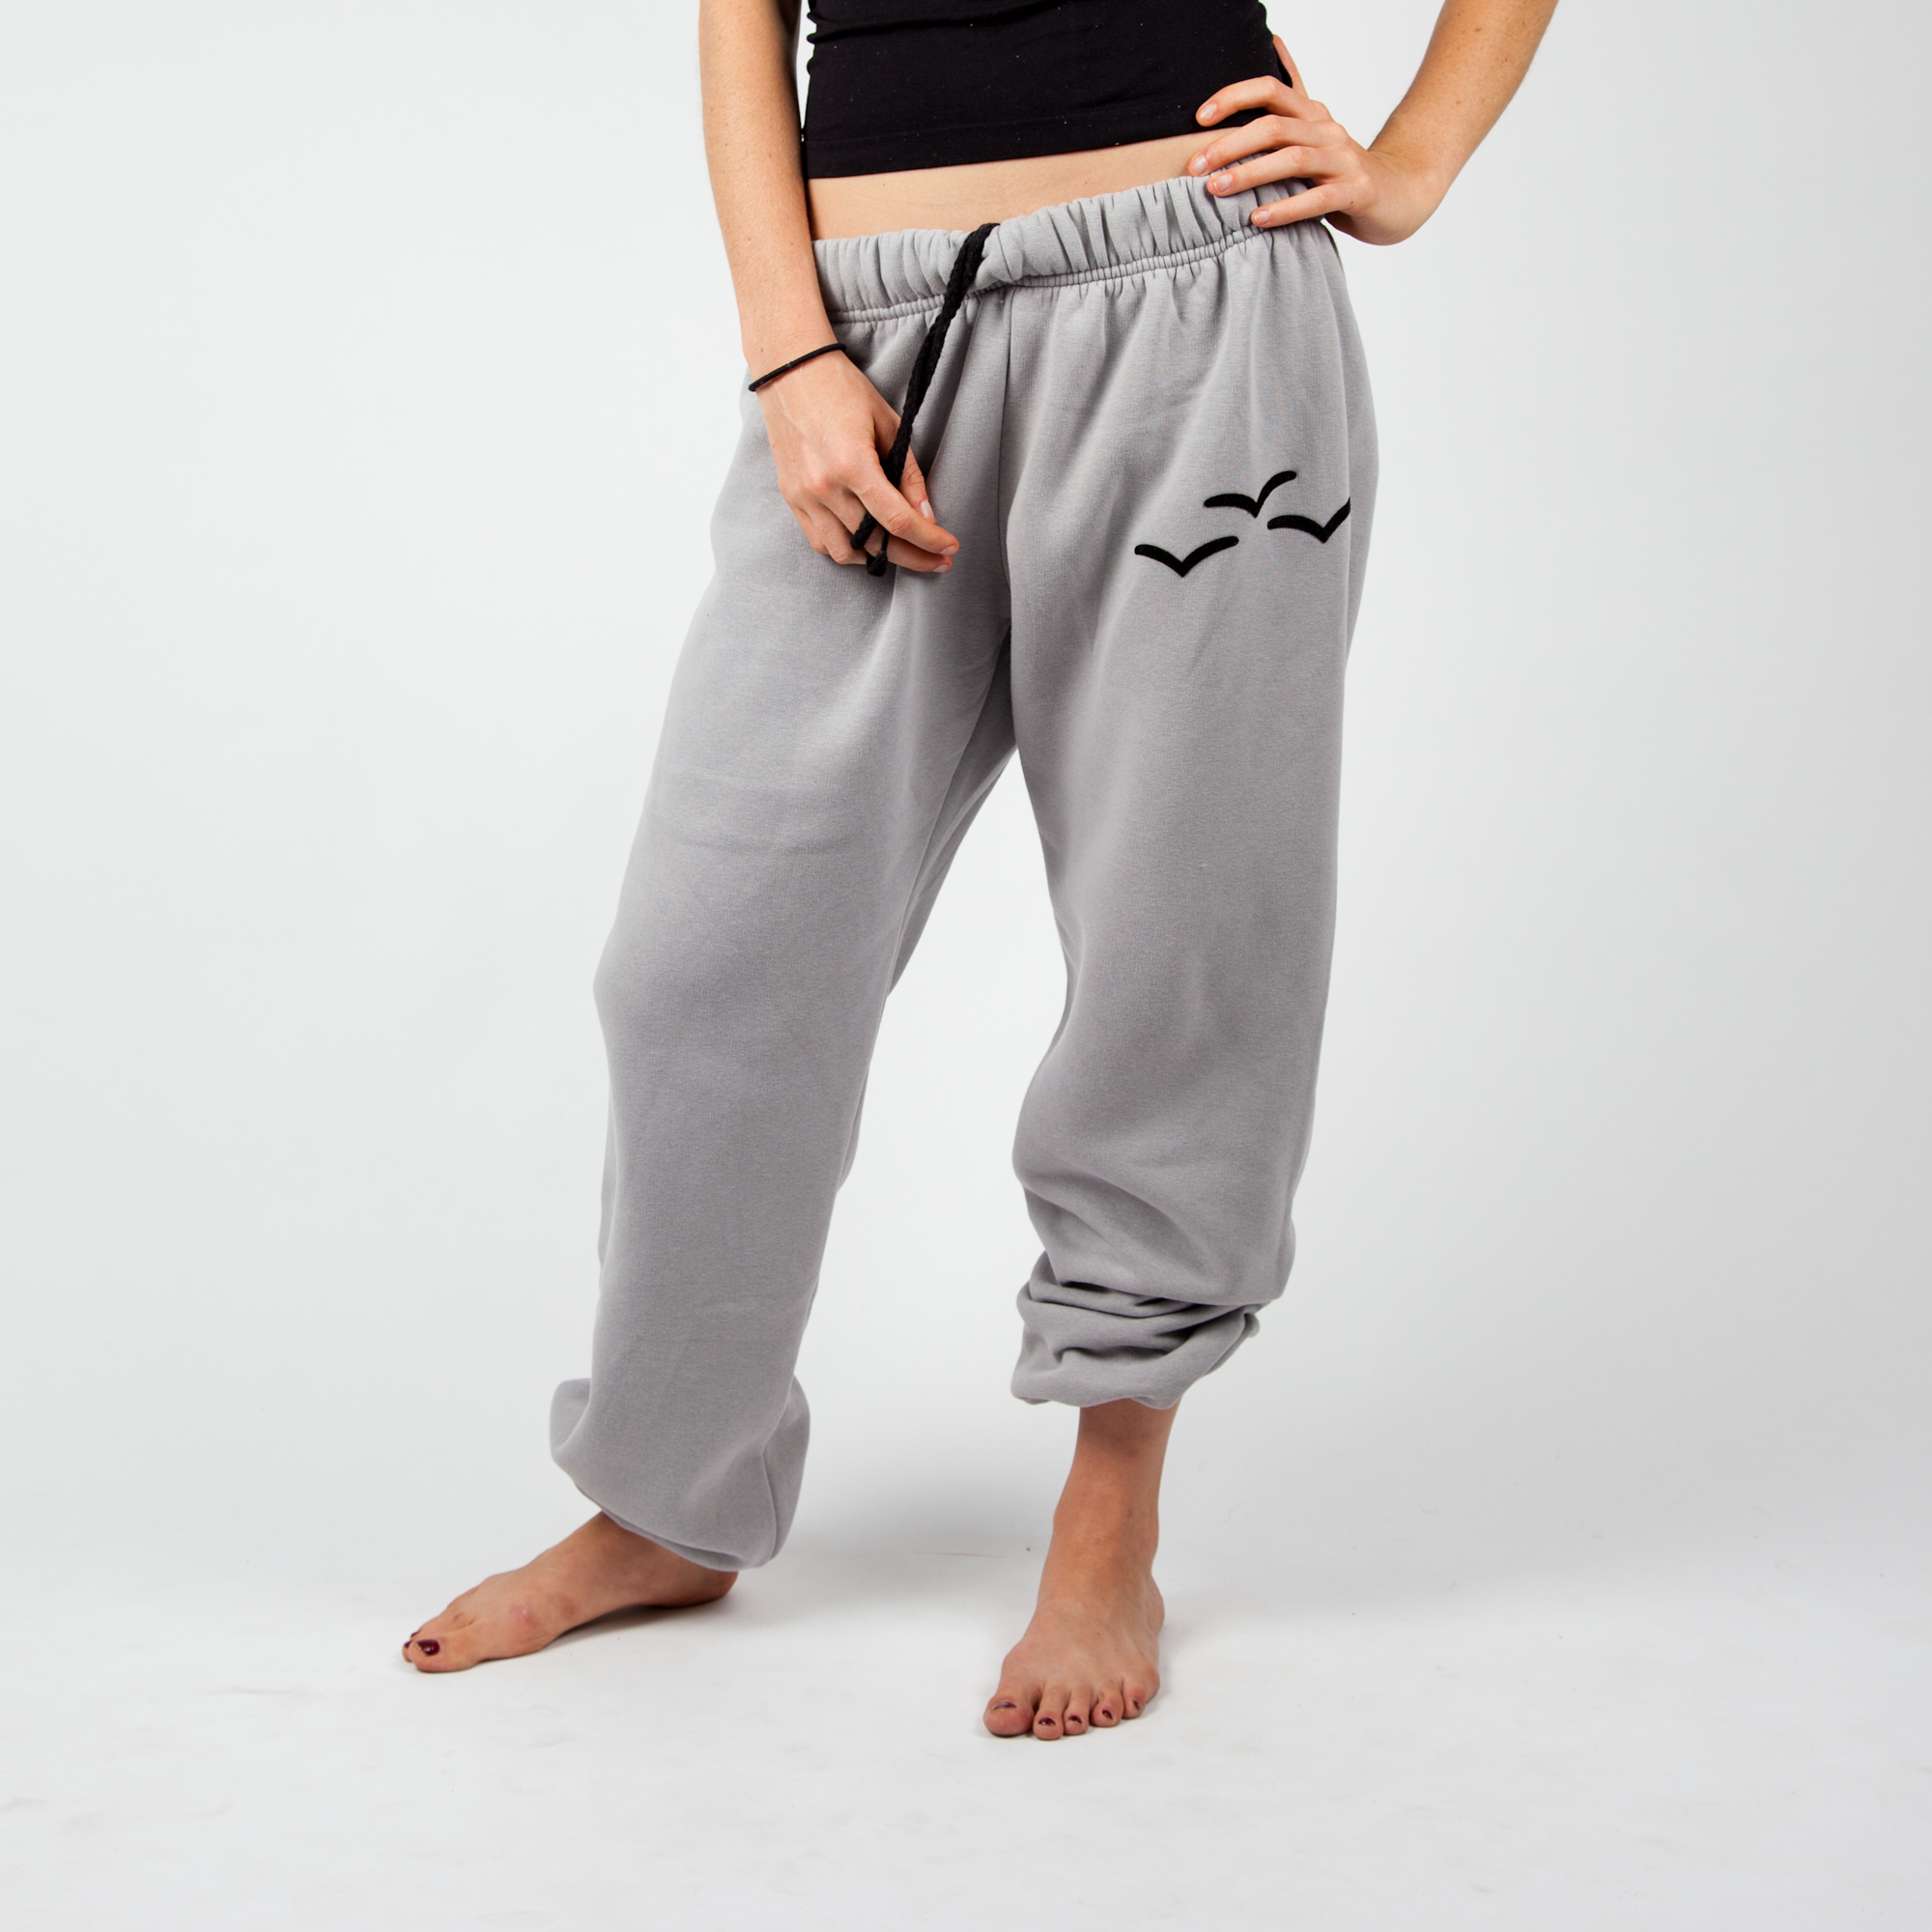 Lazypants; Coziest Sweat Pants Made in Canada